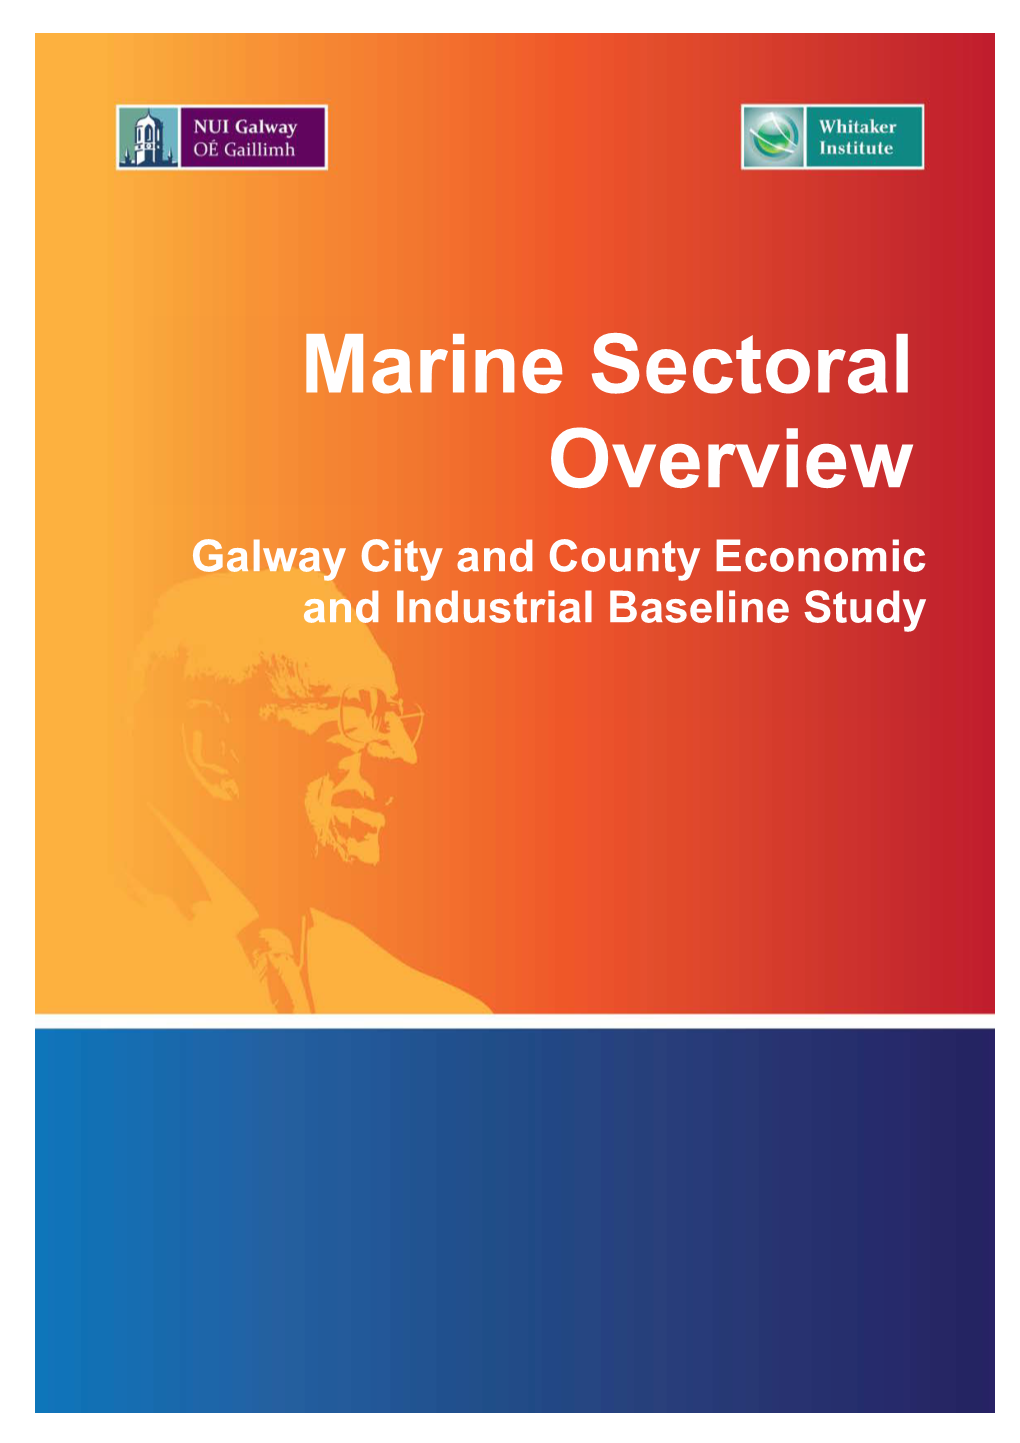 Marine Sectoral Overview Galway City and County Economic and Industrial Baseline Study